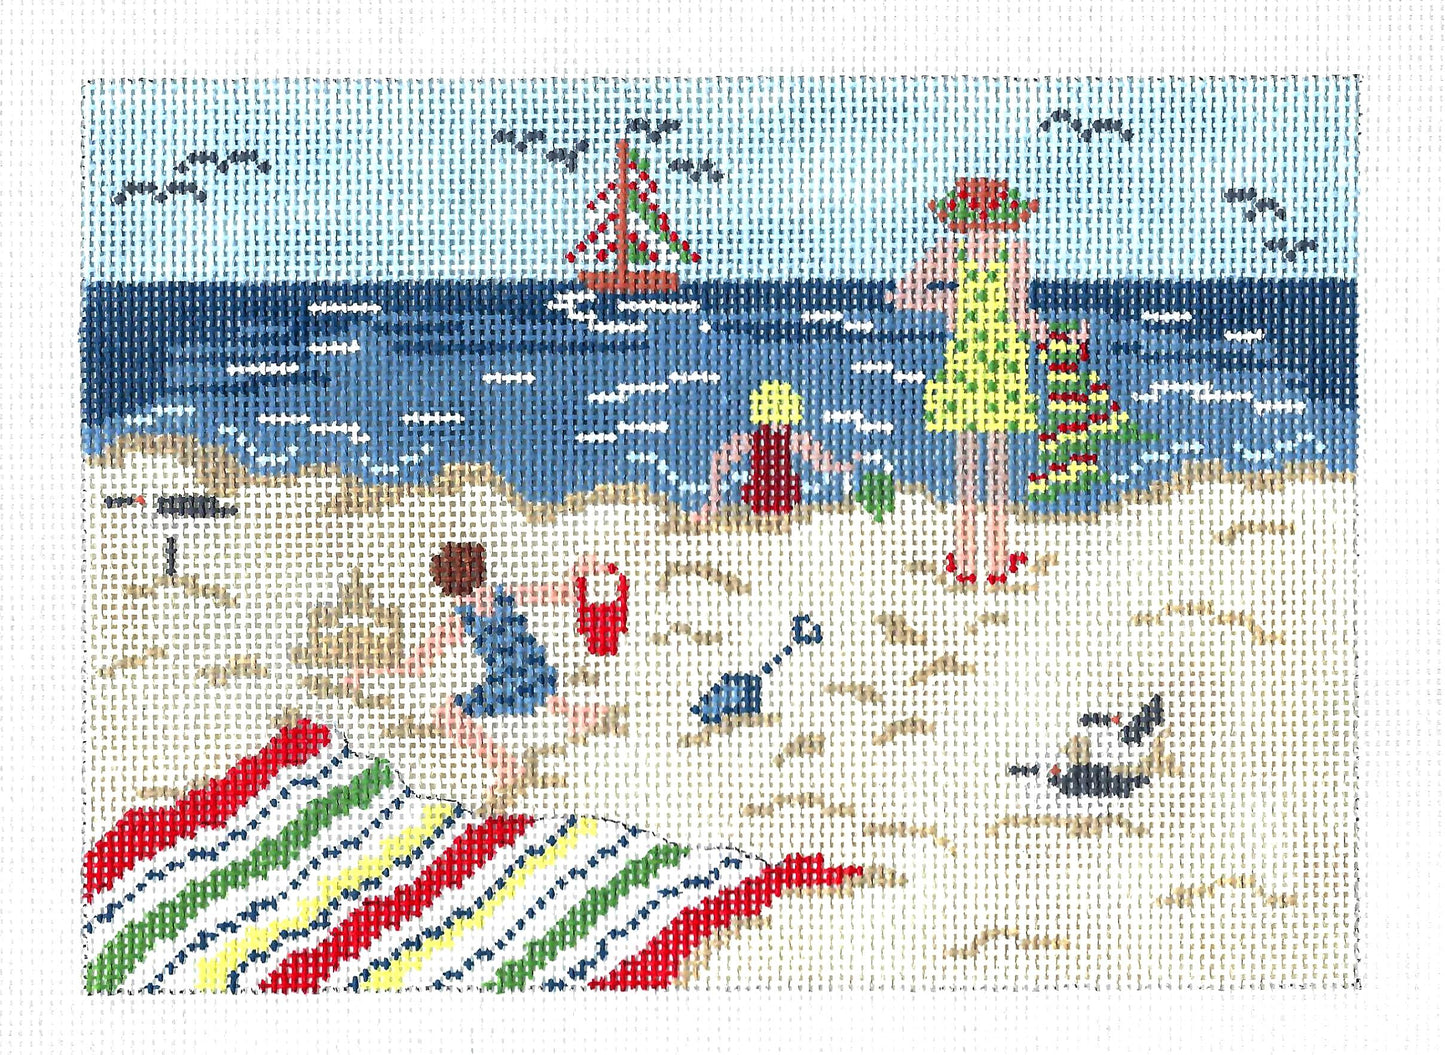 Seaside ~ Family Day at the Beach handpainted 18 mesh Needlepoint Canvas by Needle Crossings